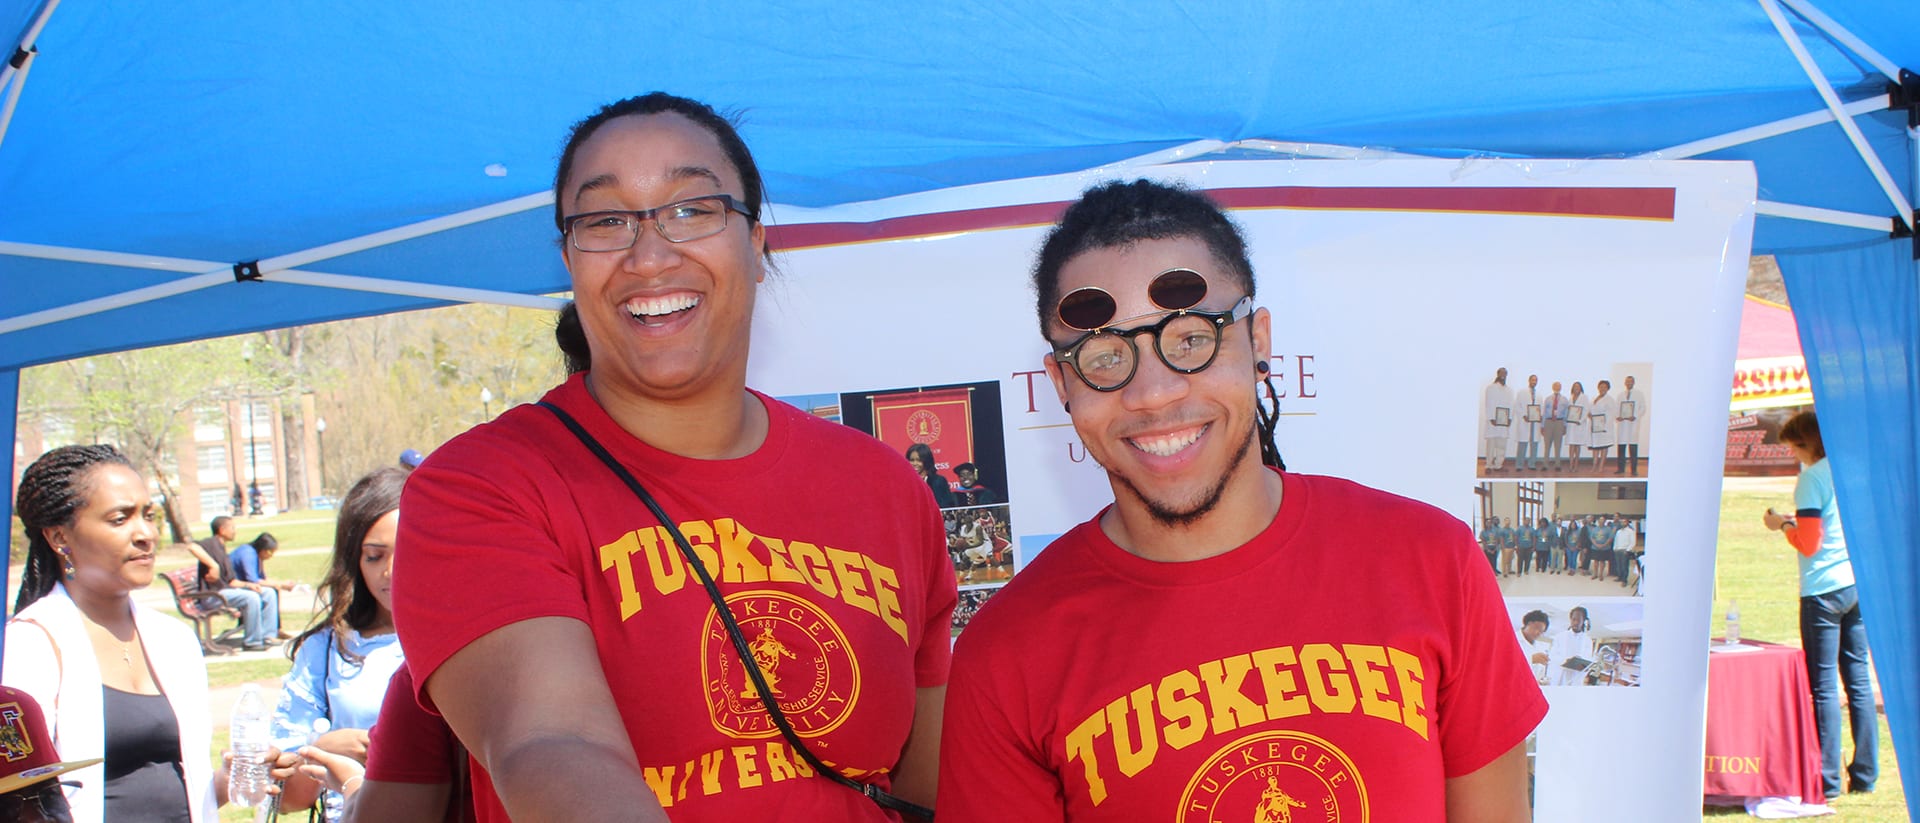 Tuskegee students under tent at open house event